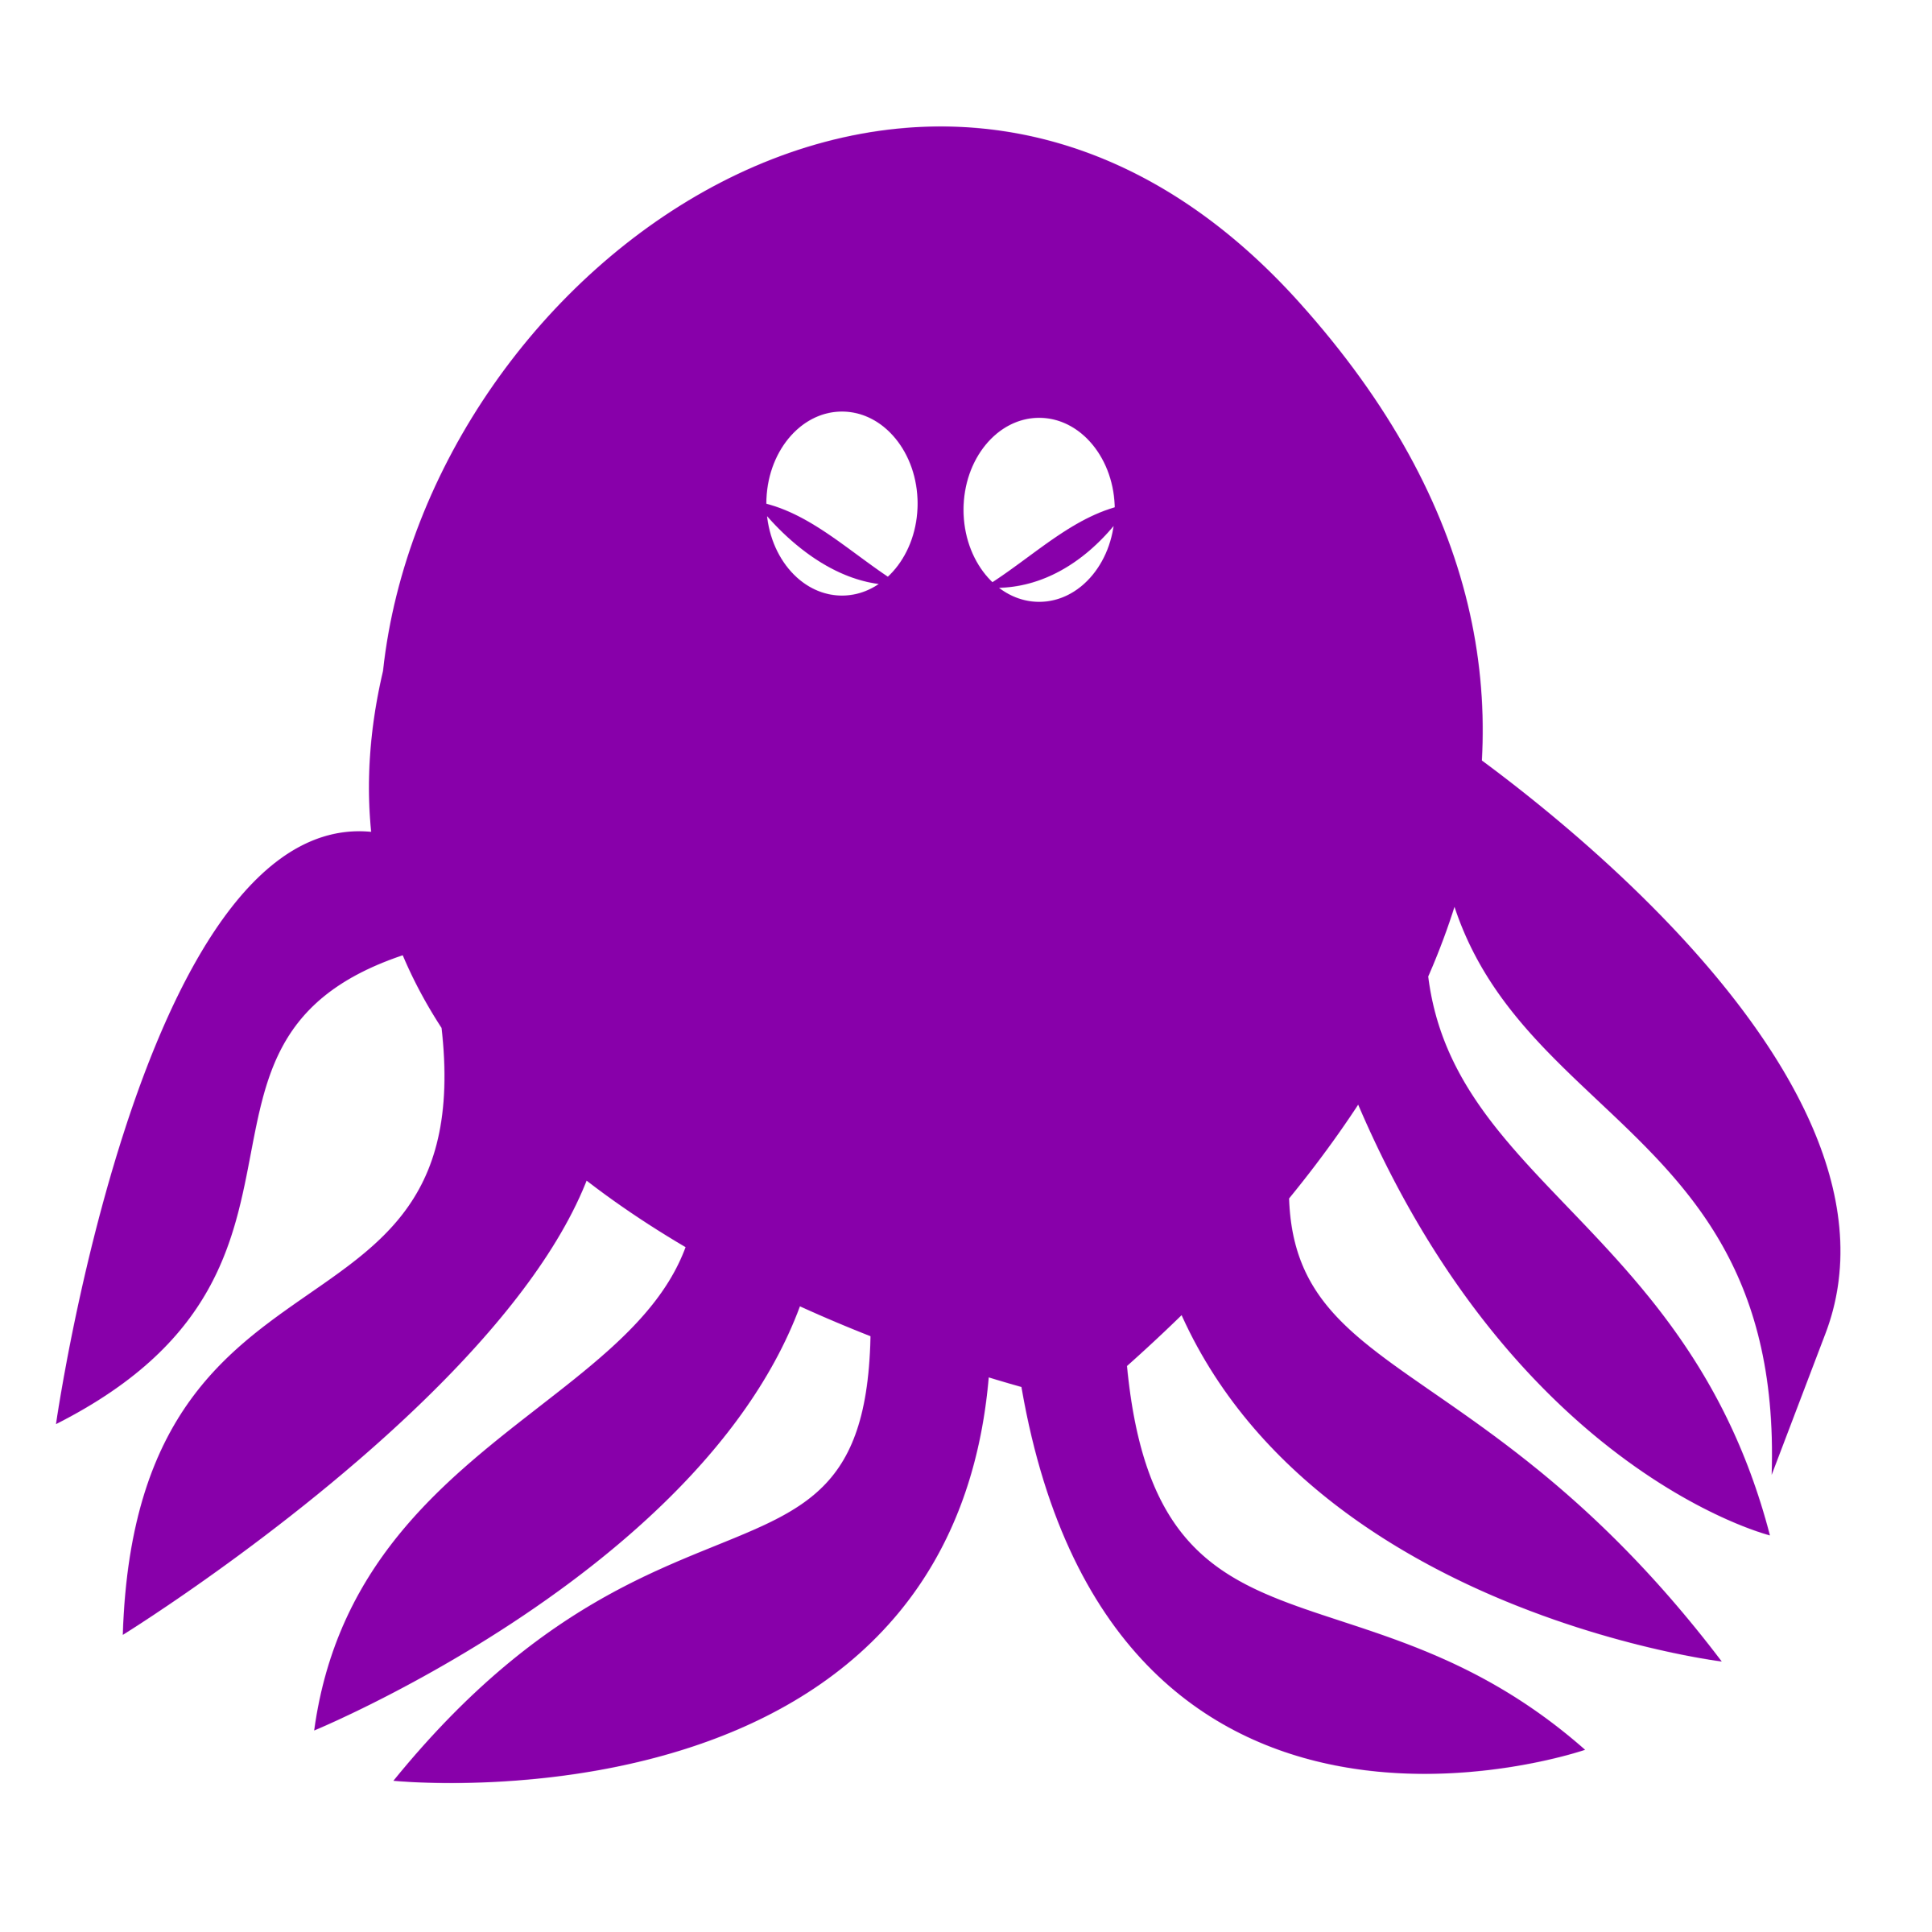 octopus clipart colored